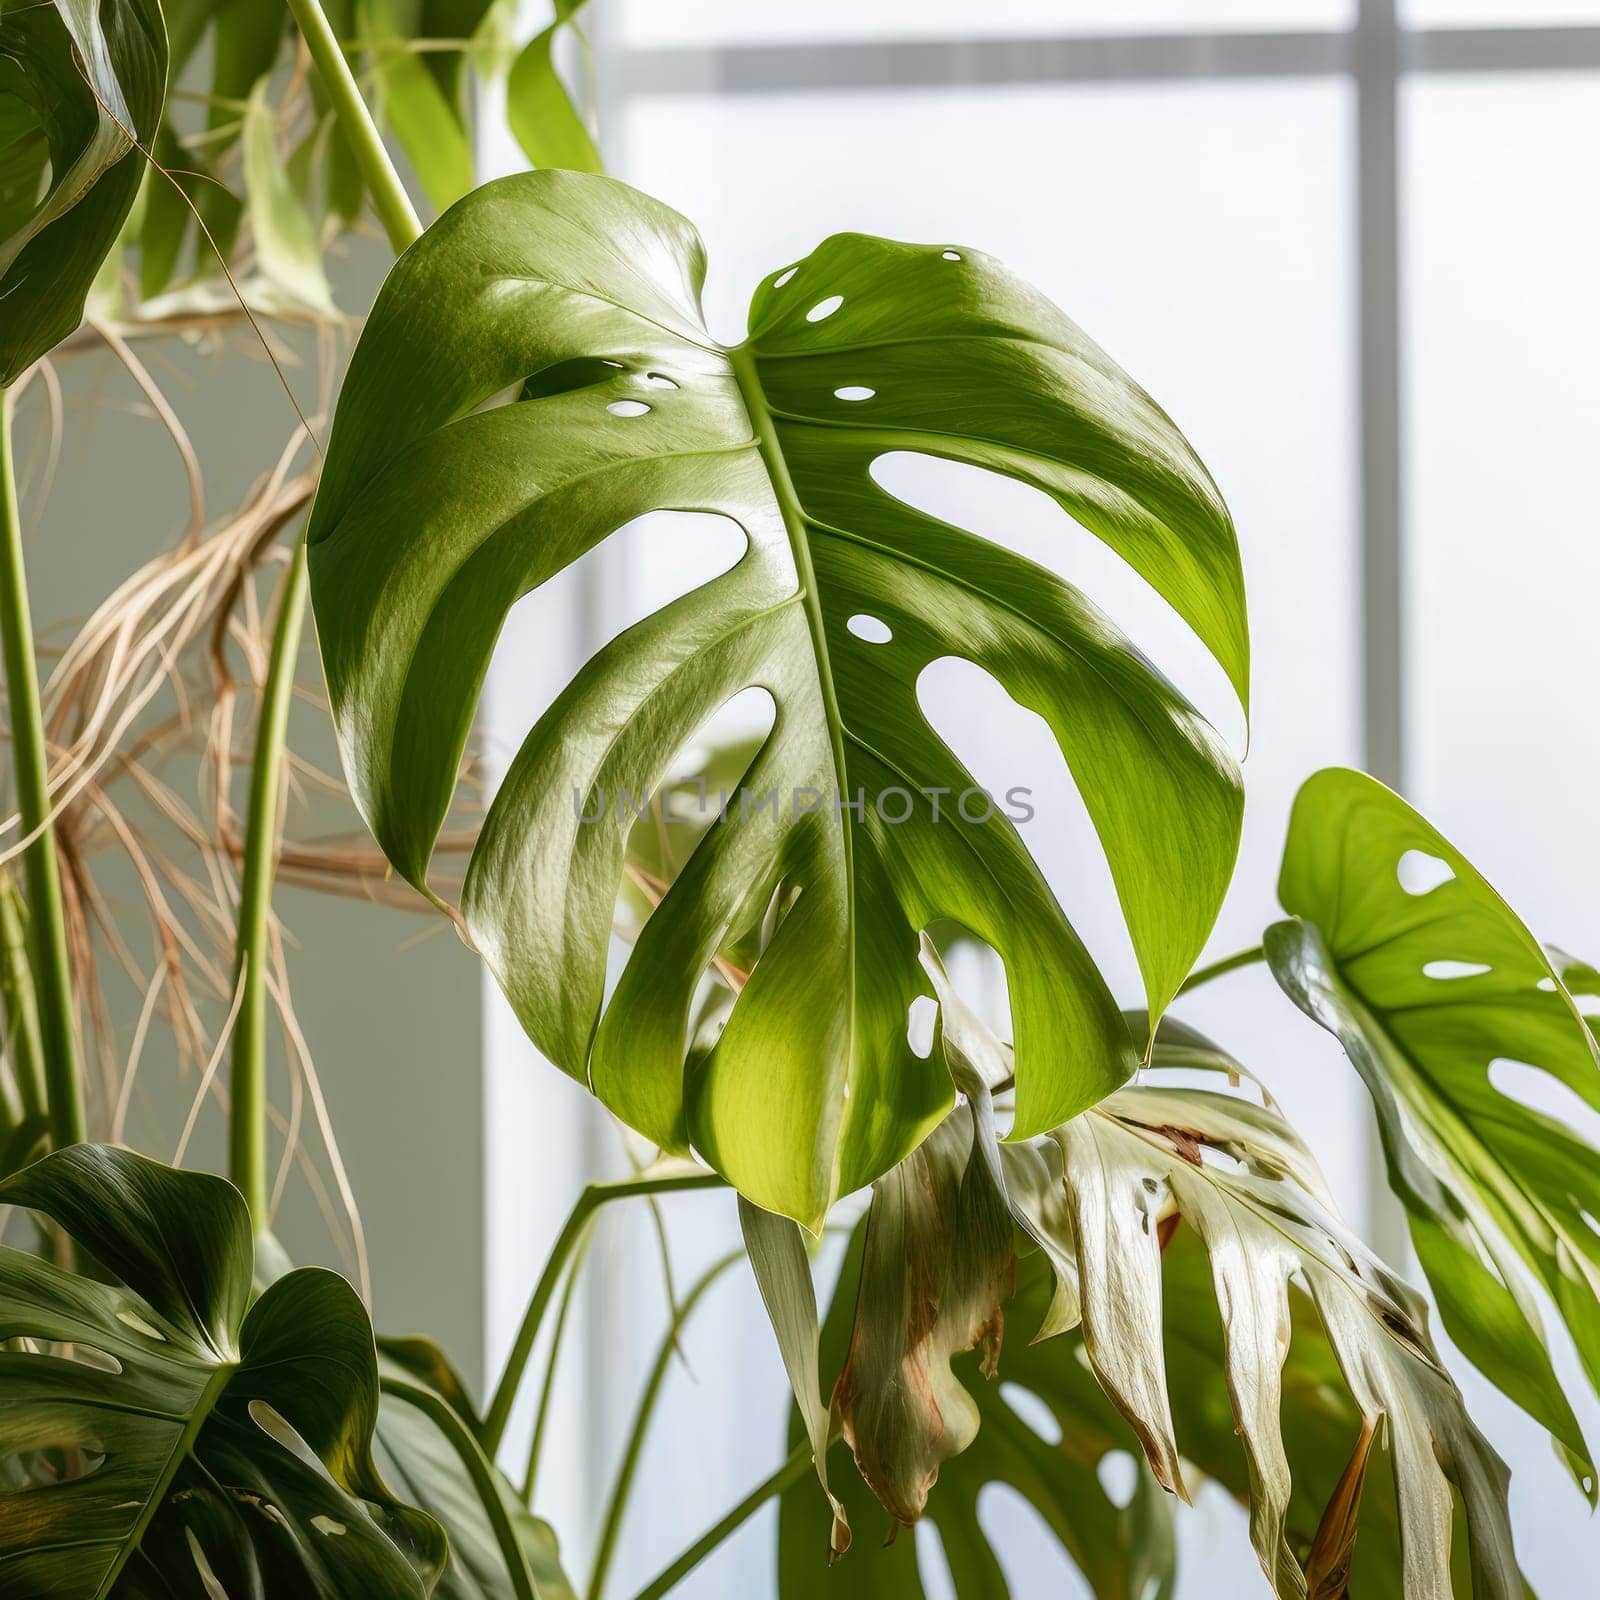 Withered monstera leaves, neglected ornamental plants, home plants, improper care.